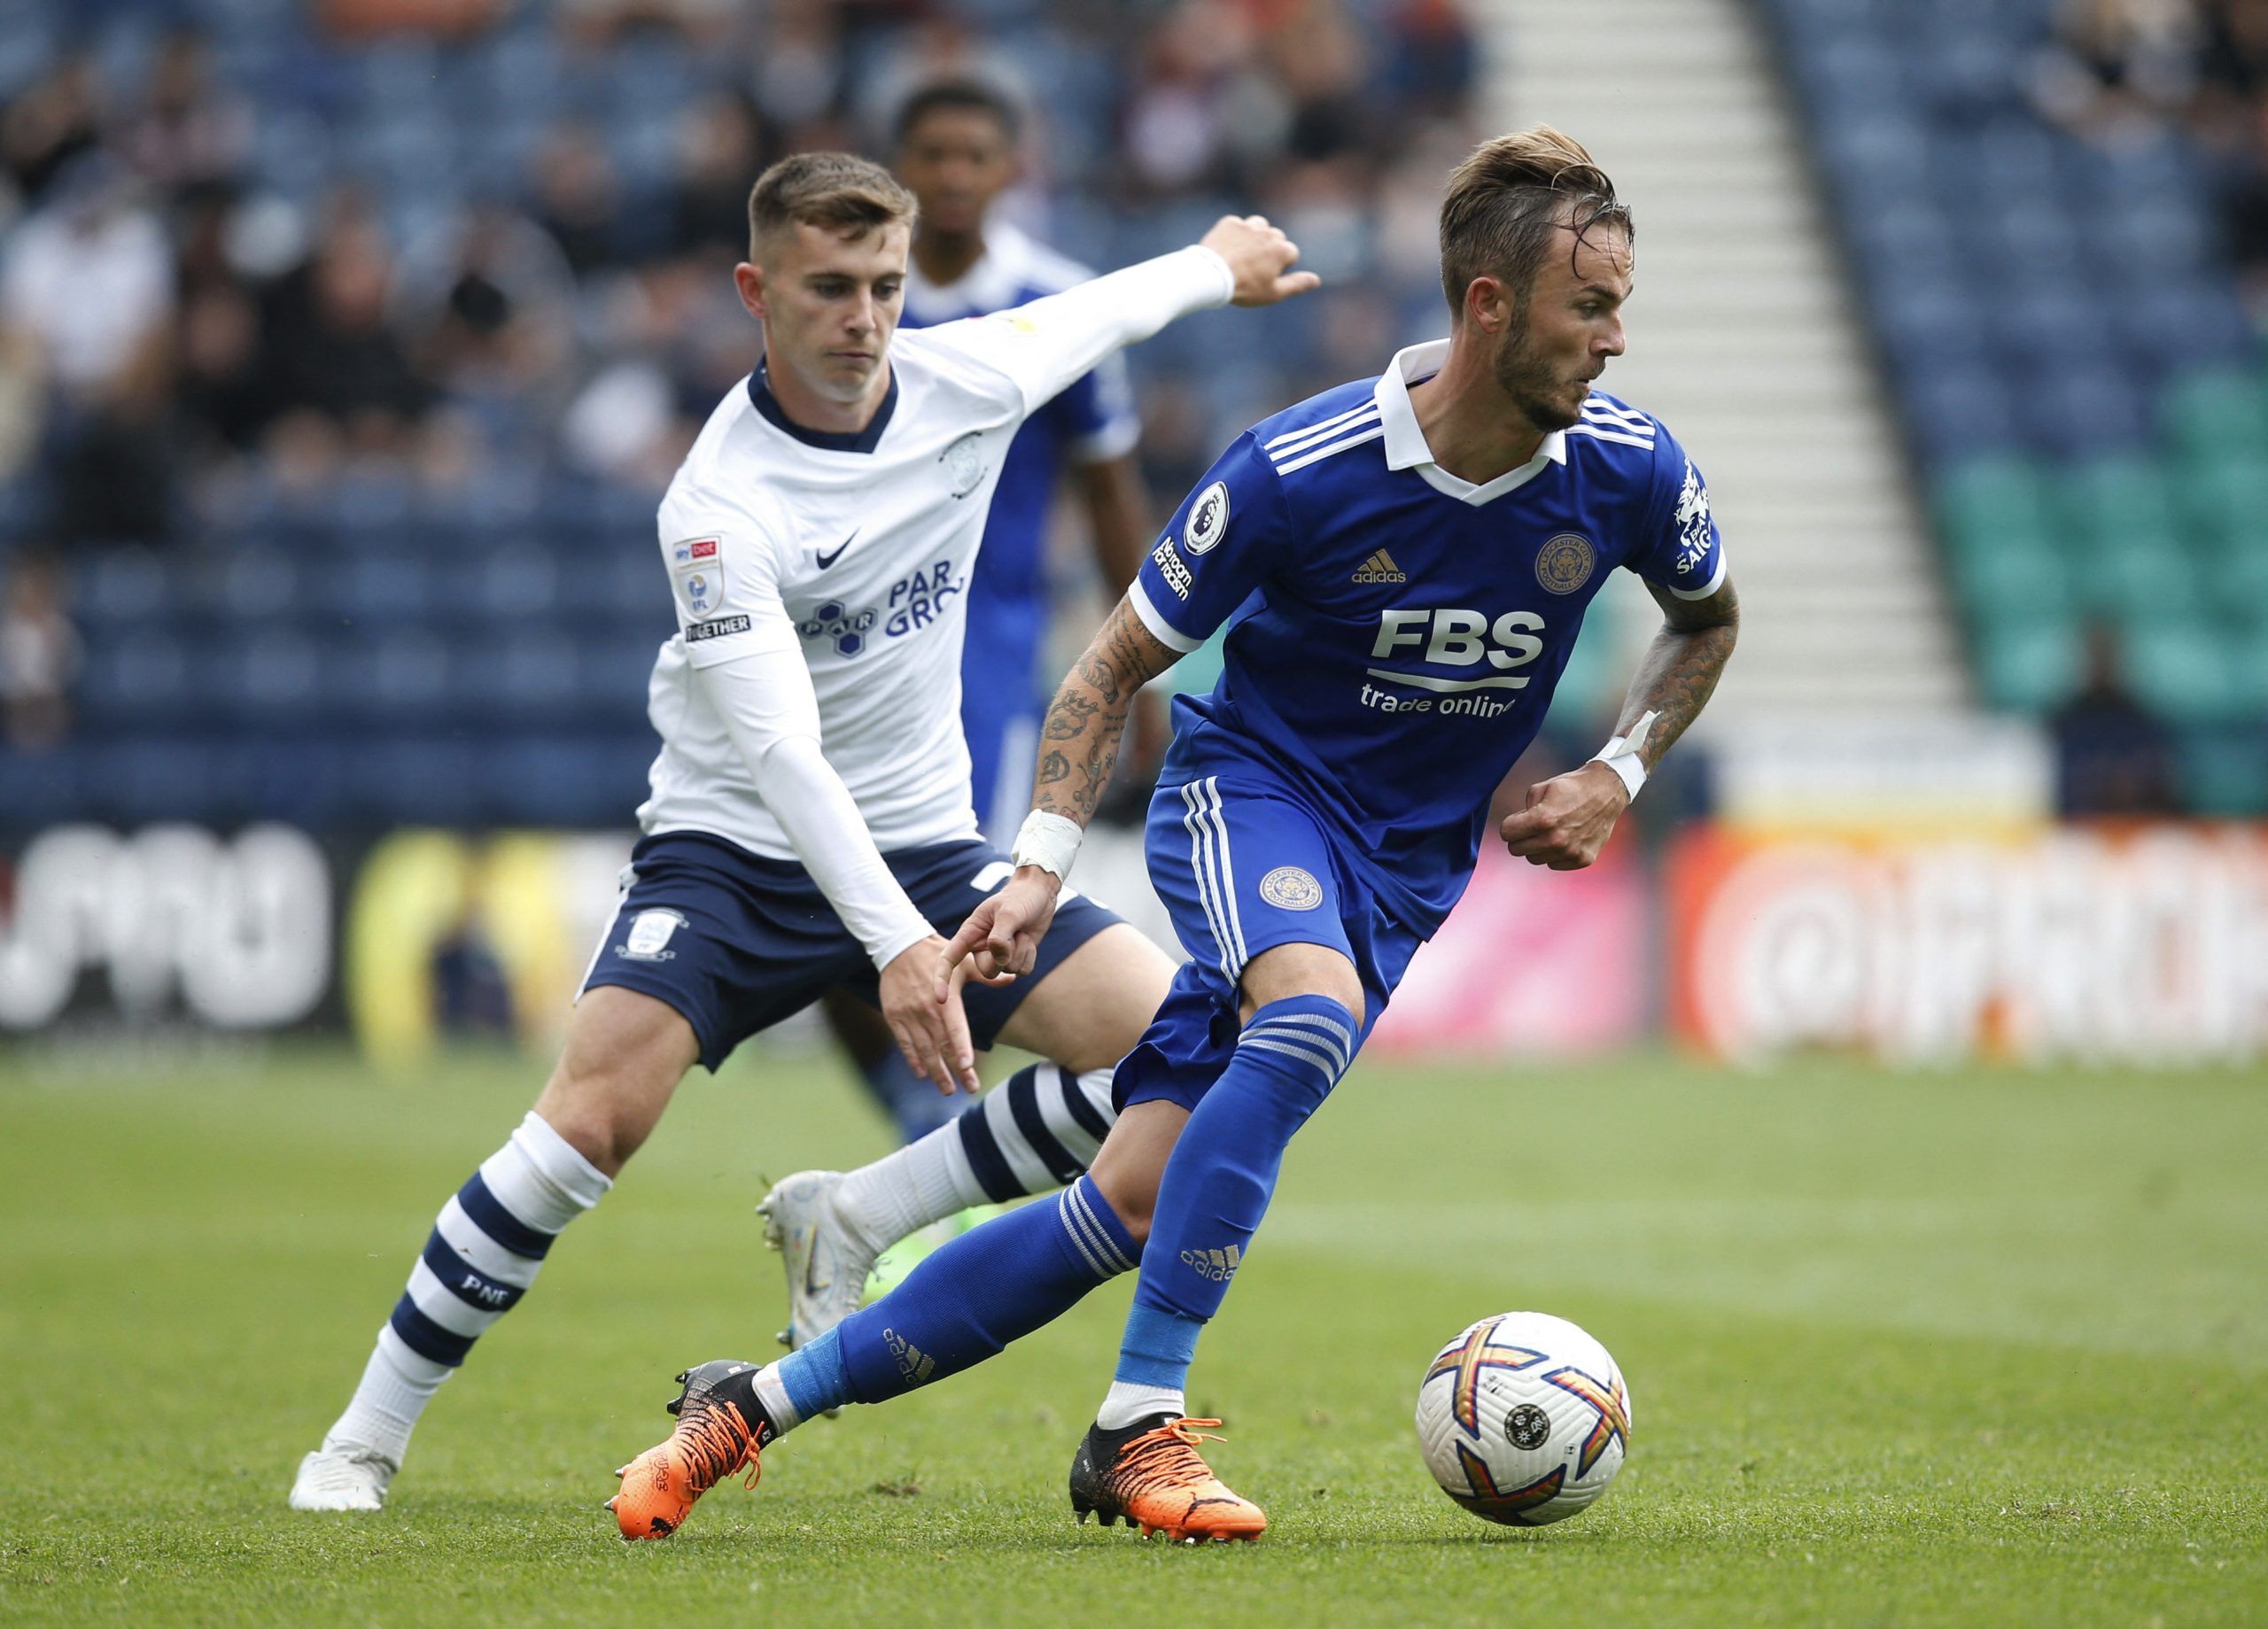 Soccer Football - Pre Season Friendly - Preston North End v Leicester City - Deepdale Stadium, Preston, Britain - July 23, 2022 Leicester City's James Maddison in action with Preston North End's Ben Woodburn Action Images via Reuters/Ed Sykes